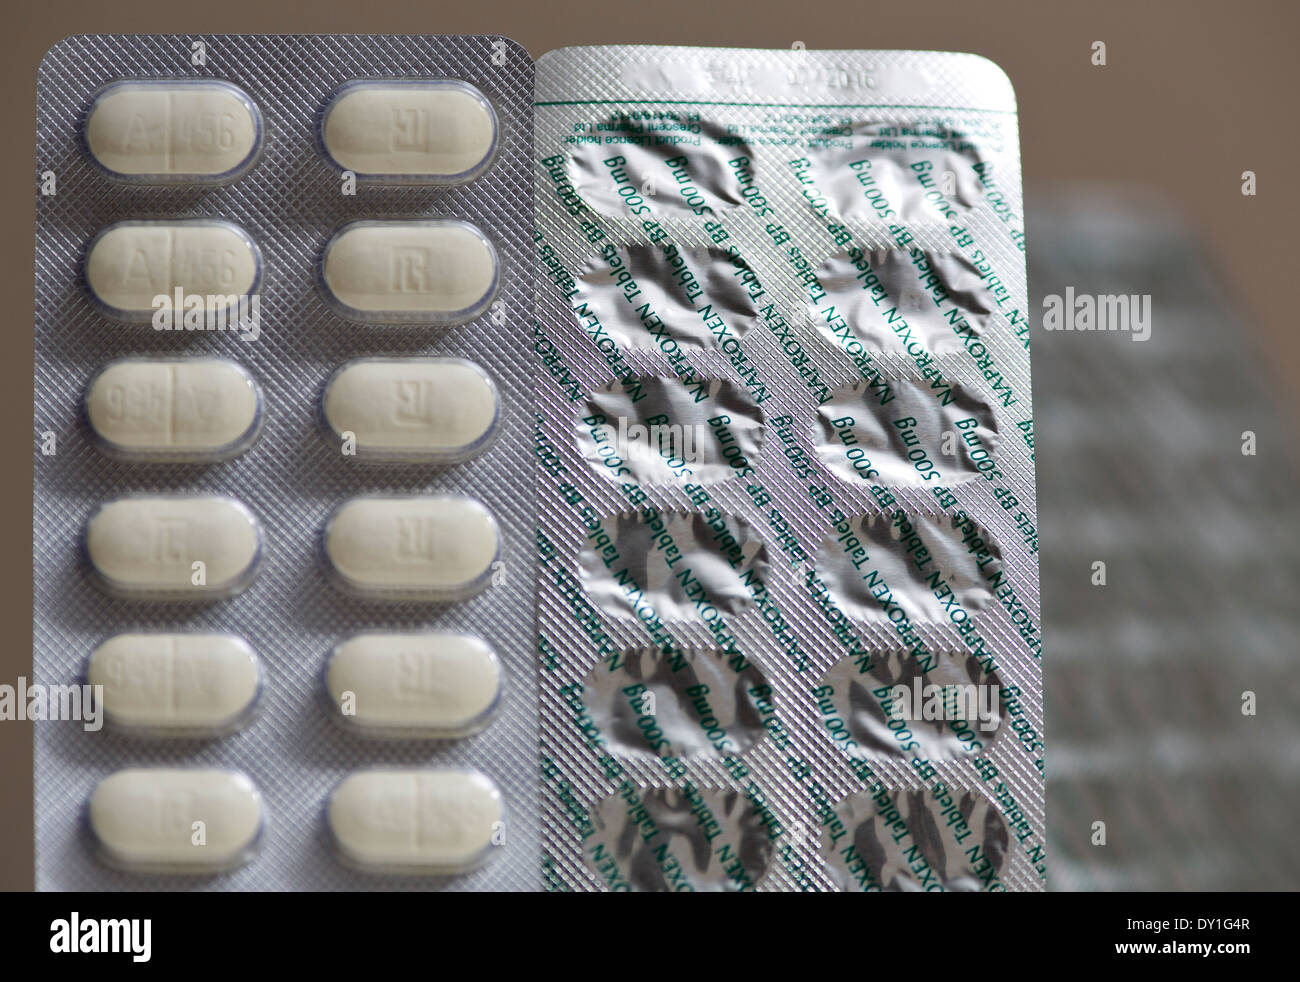 Naproxen 500mg enteric coated tablets a non-steroidal anti-inflammatory  drug (NSAID Stock Photo - Alamy